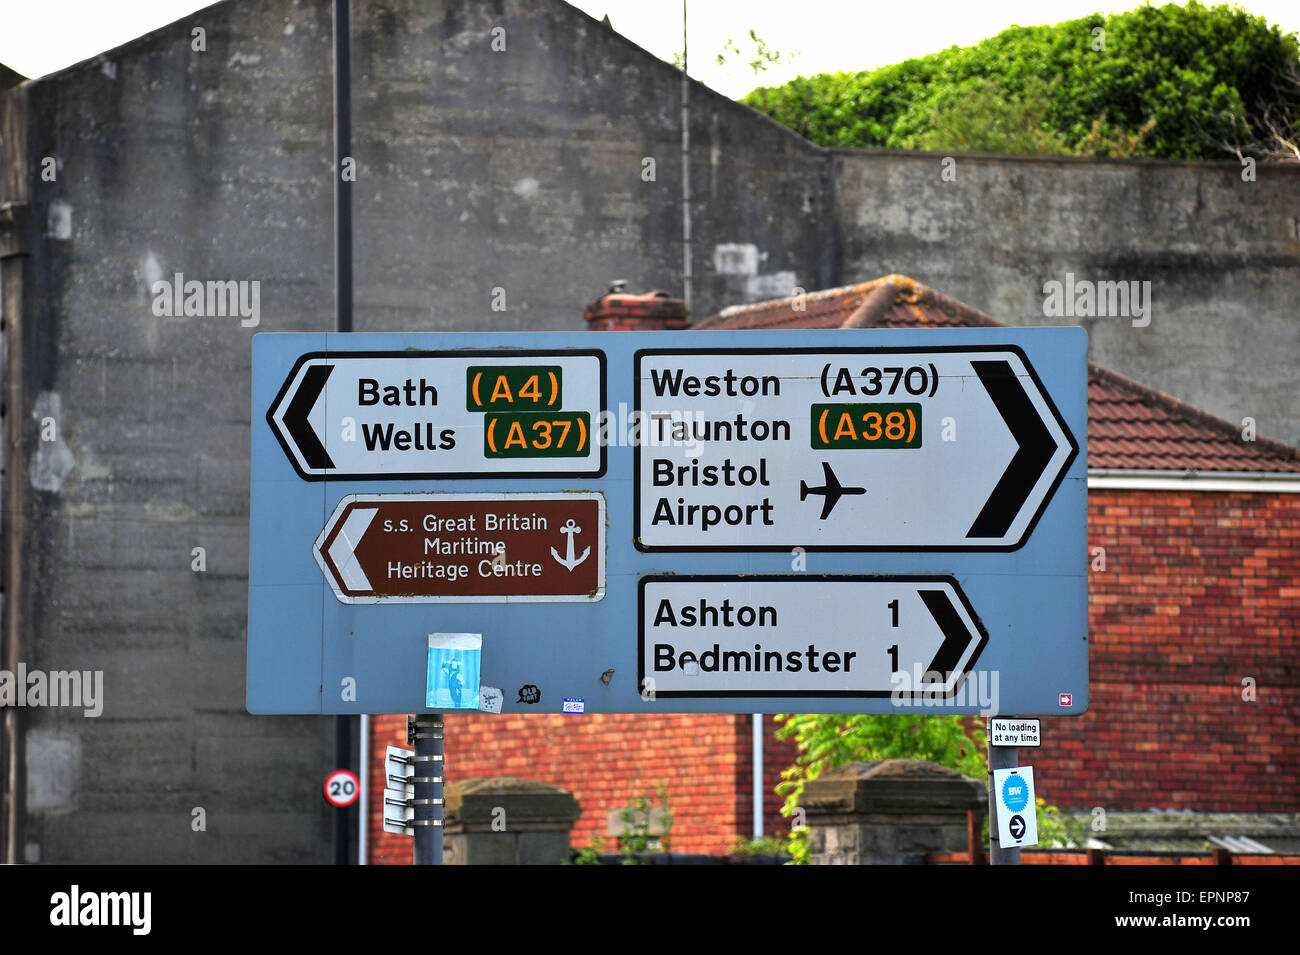 A road sign in Bristol directing traffic to Bath and Wells or Weston, Taunton and Bristol Airport. Stock Photo